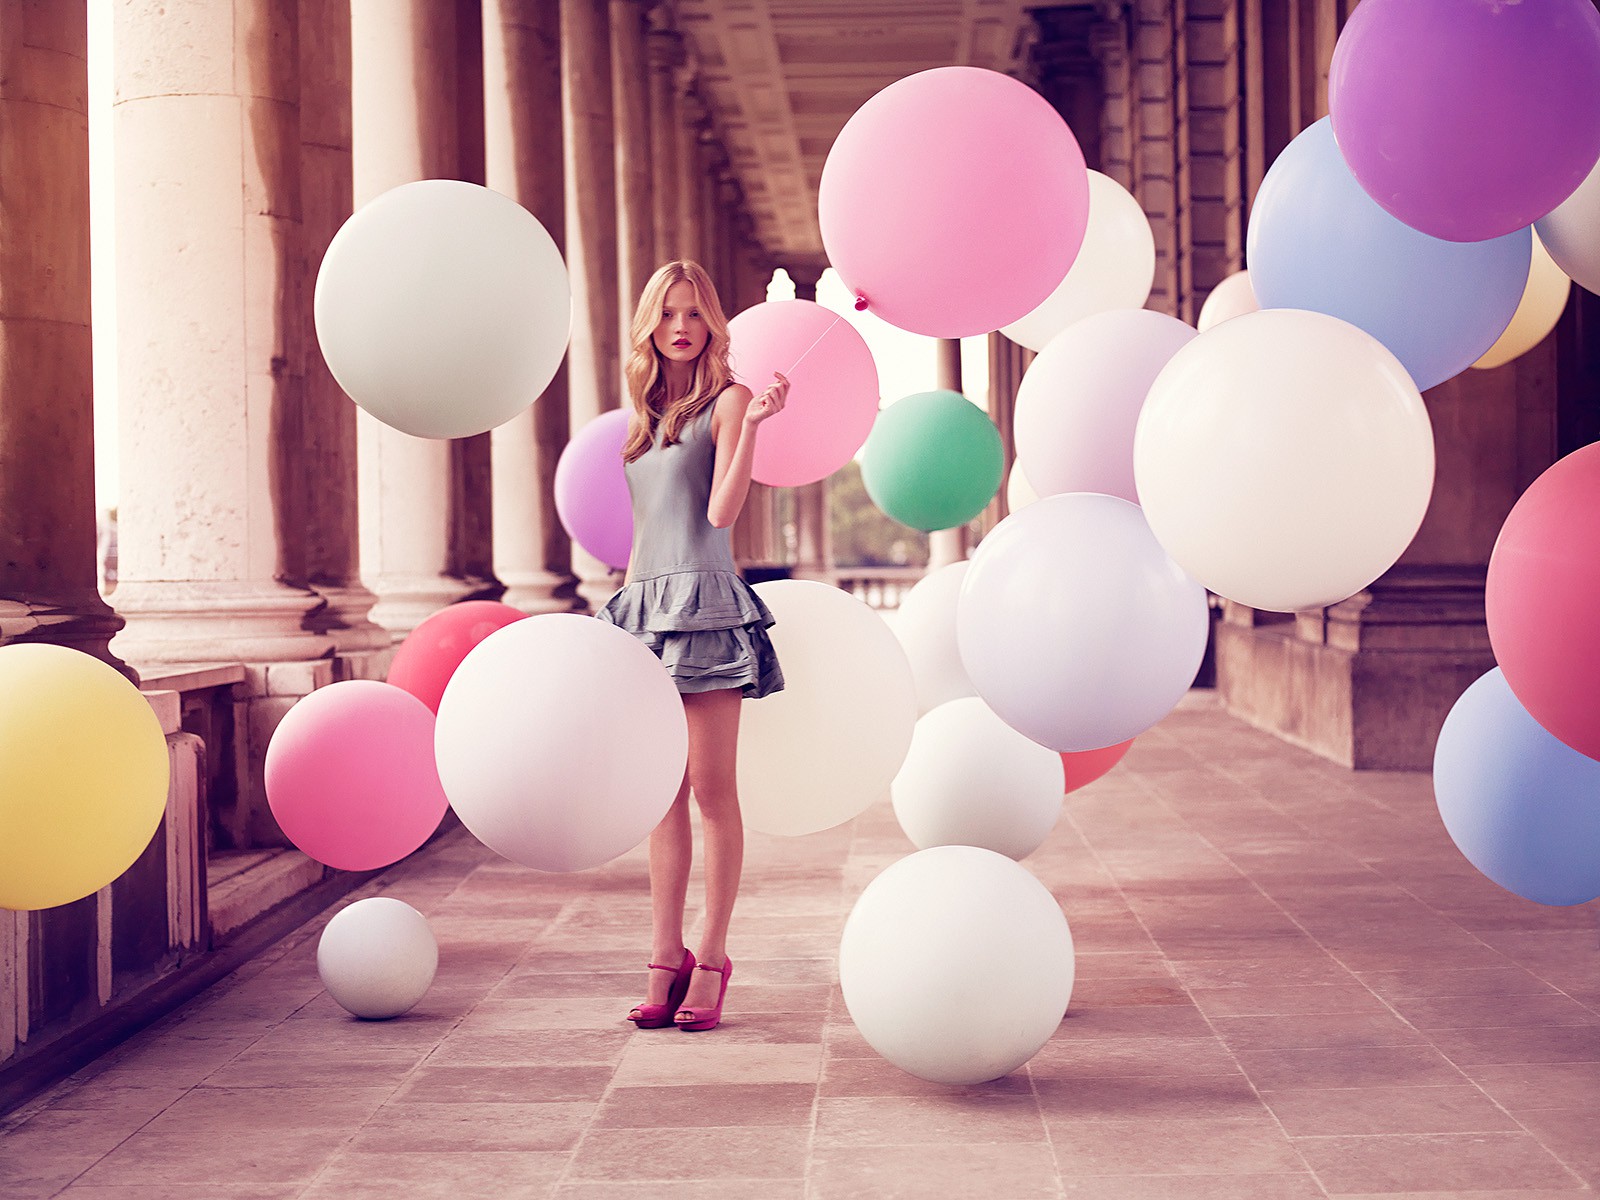 girl with balloons - Google Search | Senior pictures | Pinterest